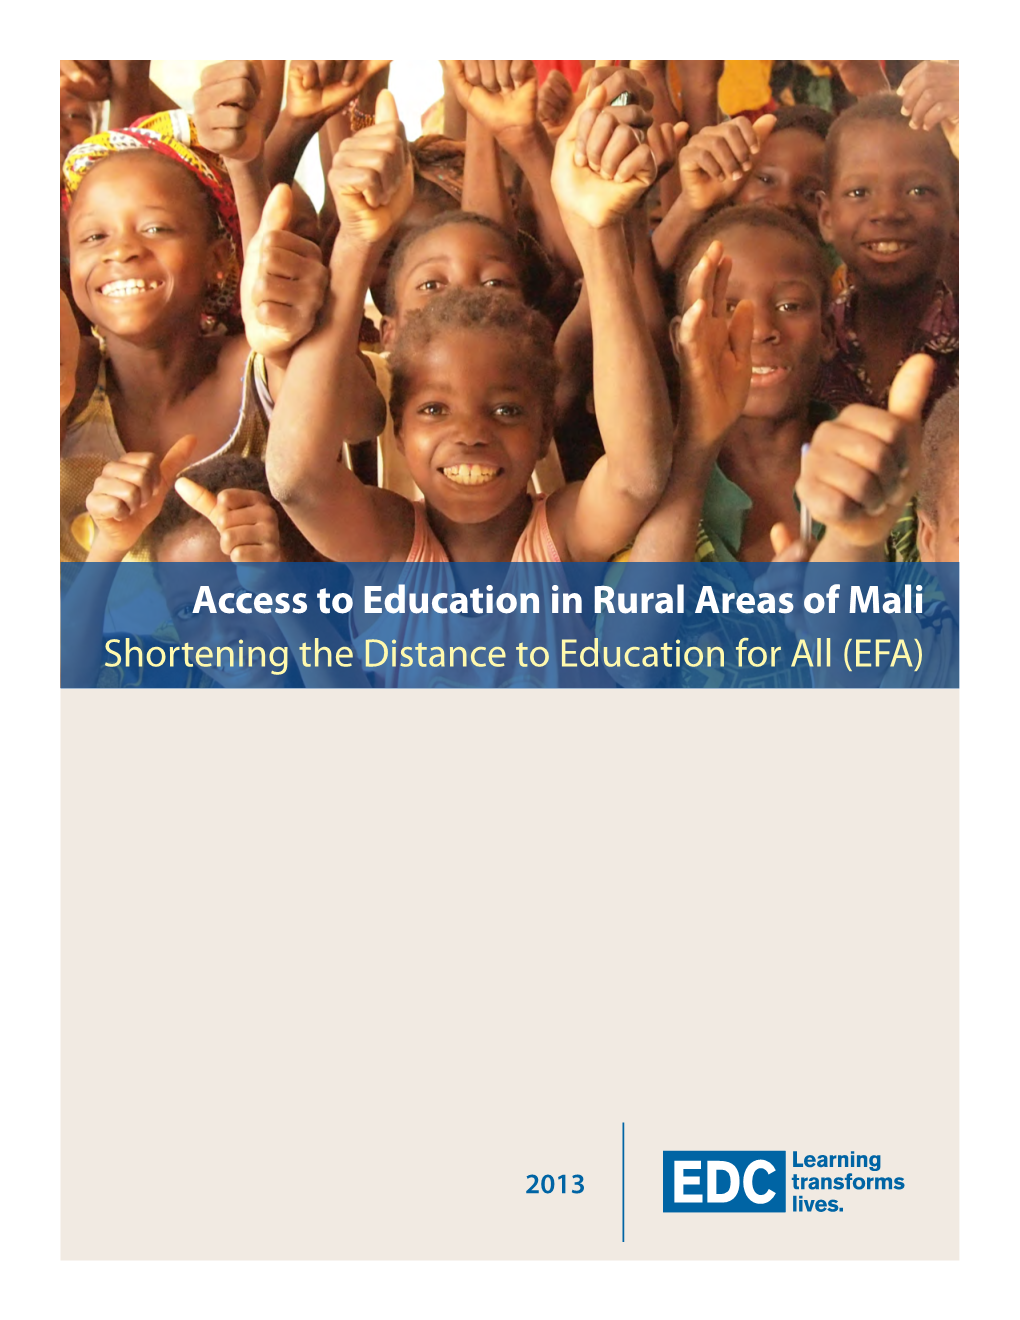 Access to Education in Rural Areas of Mali Shortening the Distance to Education for All (EFA)